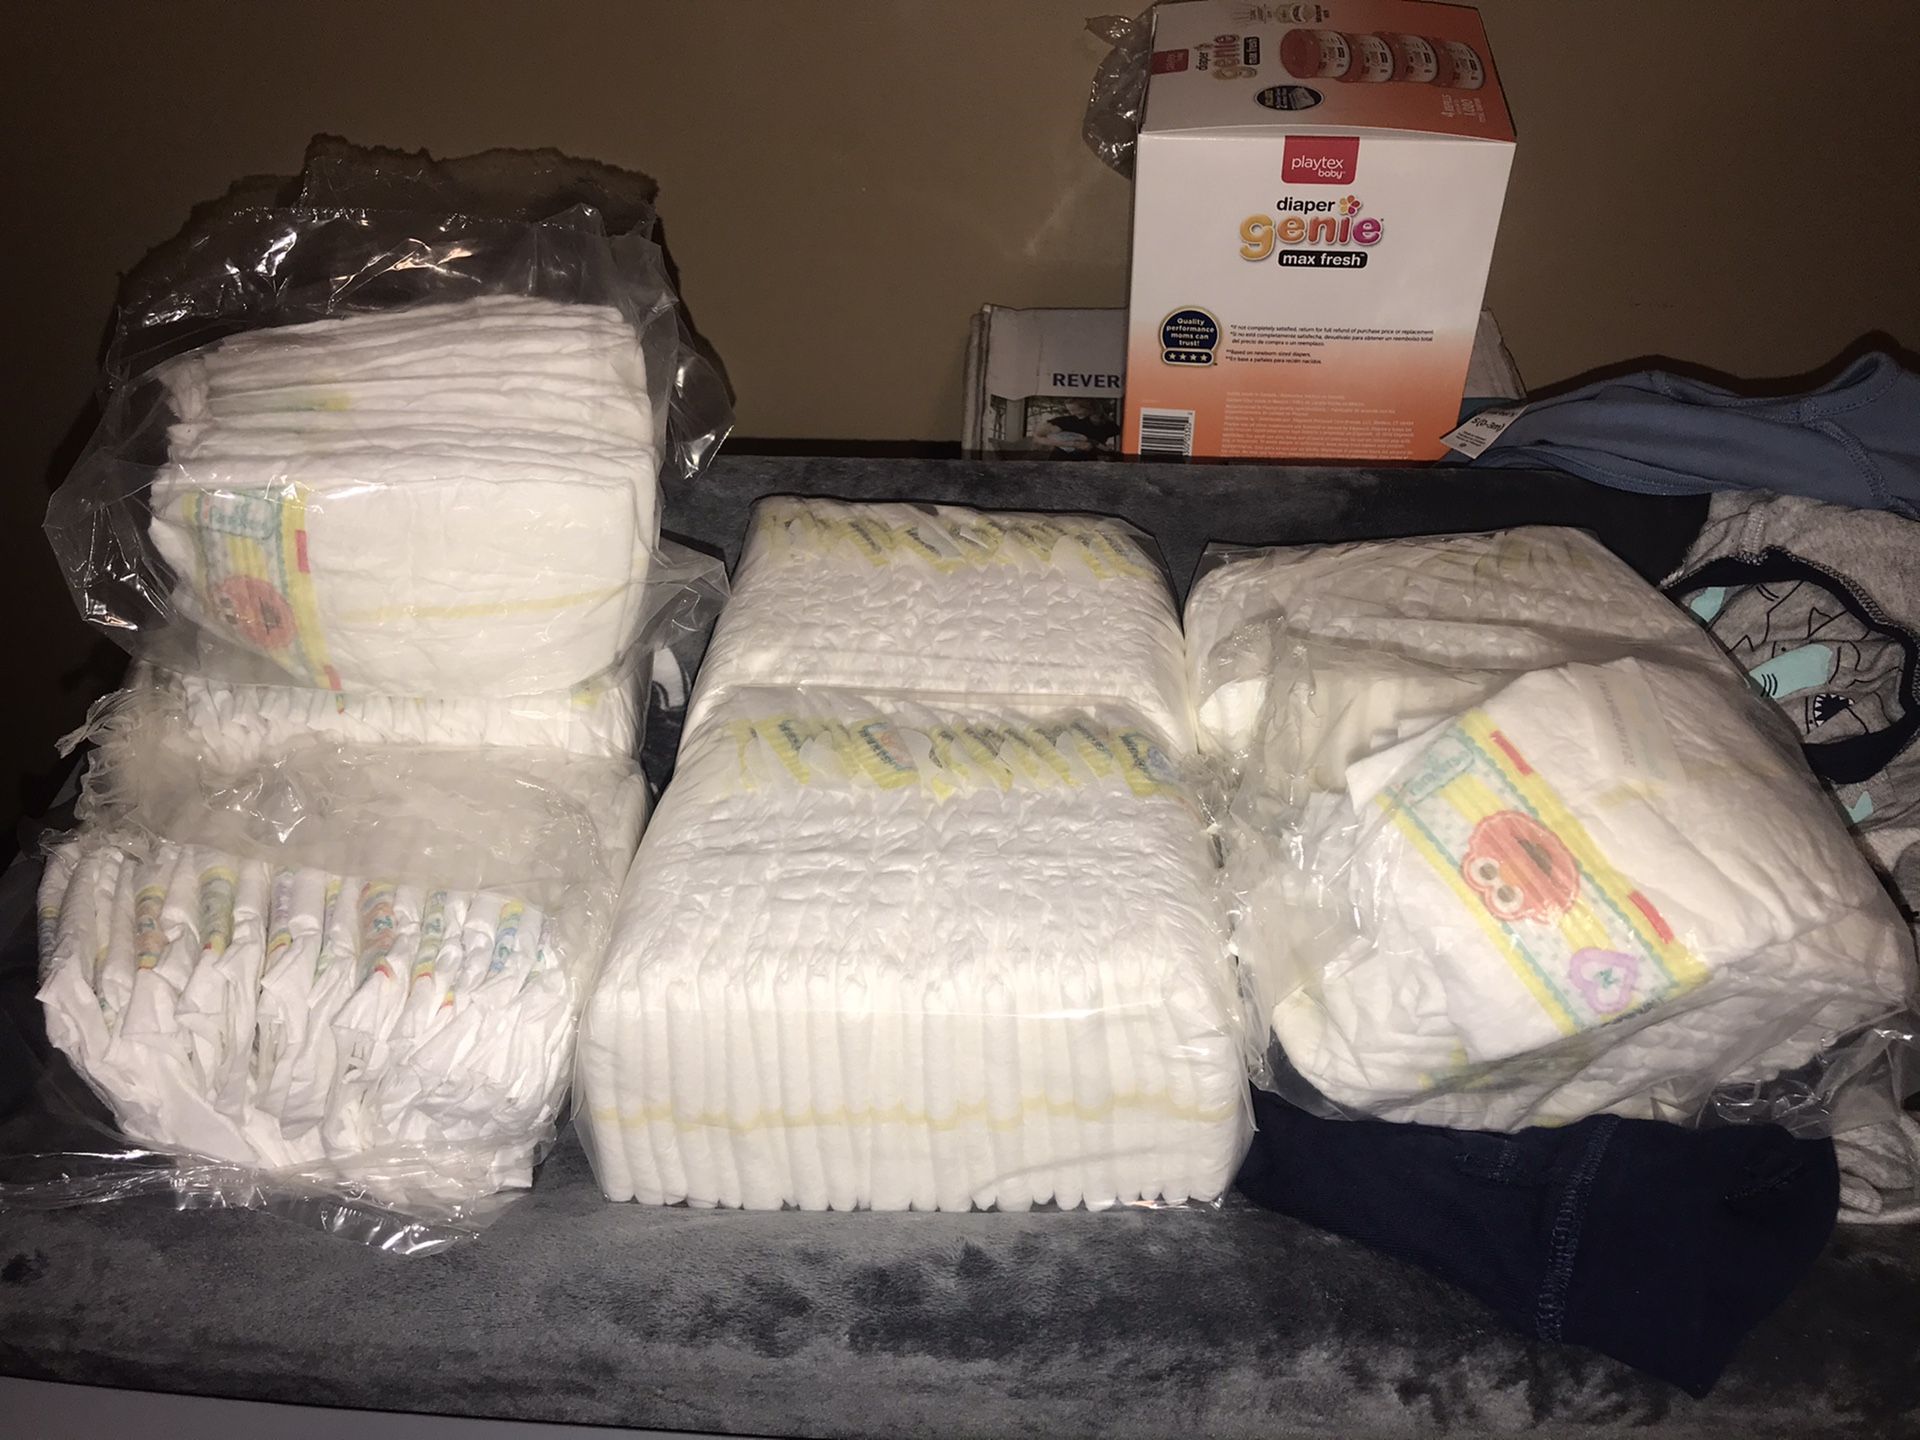 Newborn pampers diapers